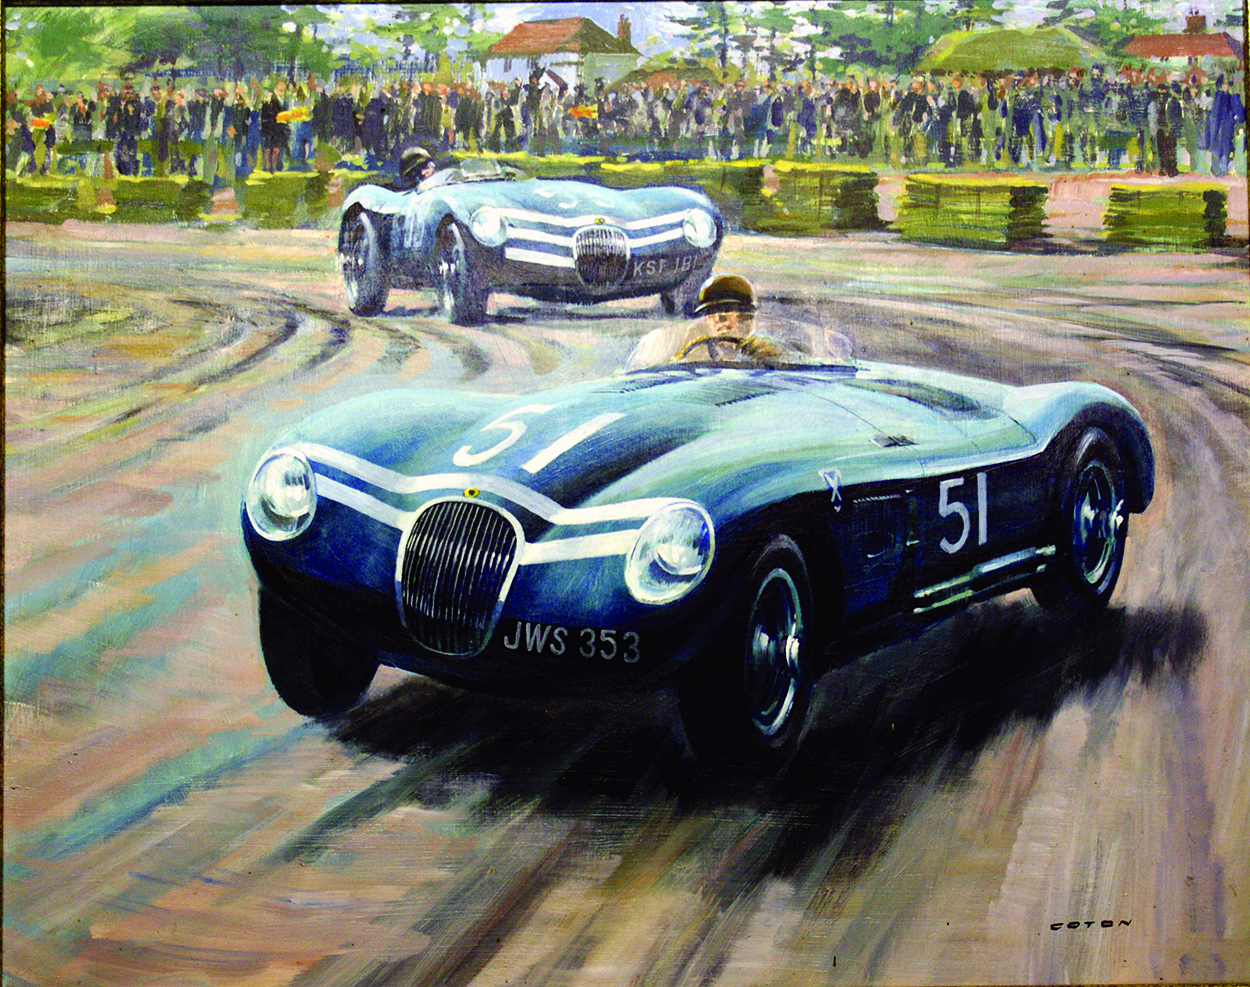 Jaguar Type C raced by Ian Stewart (Original) (Signed) art by Graham Coton at The Illustration Art Gallery